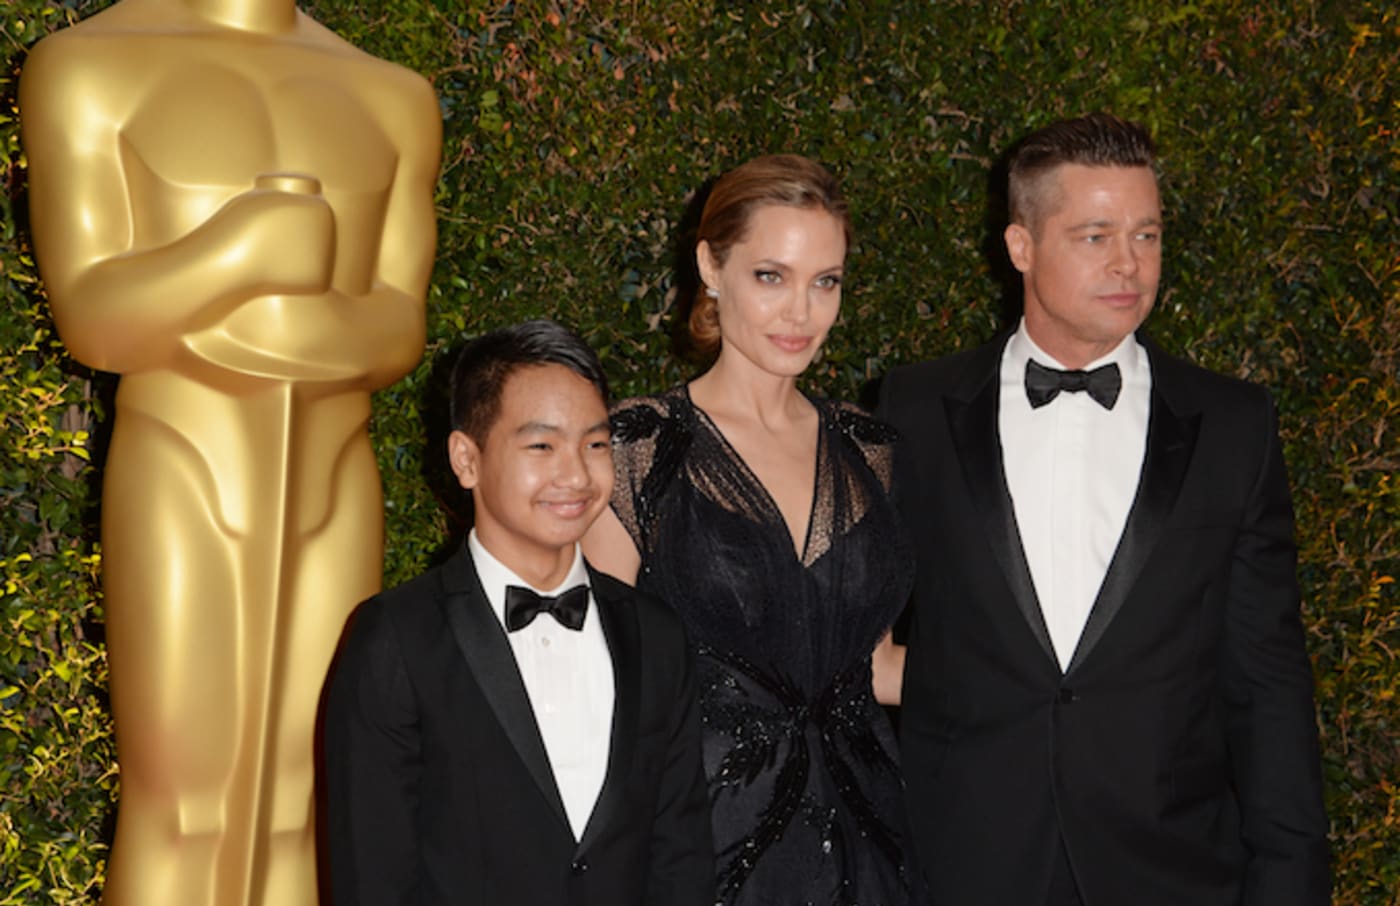 Angelina Jolie and Brad Pitt with their son Maddox at the Oscars in 2013.